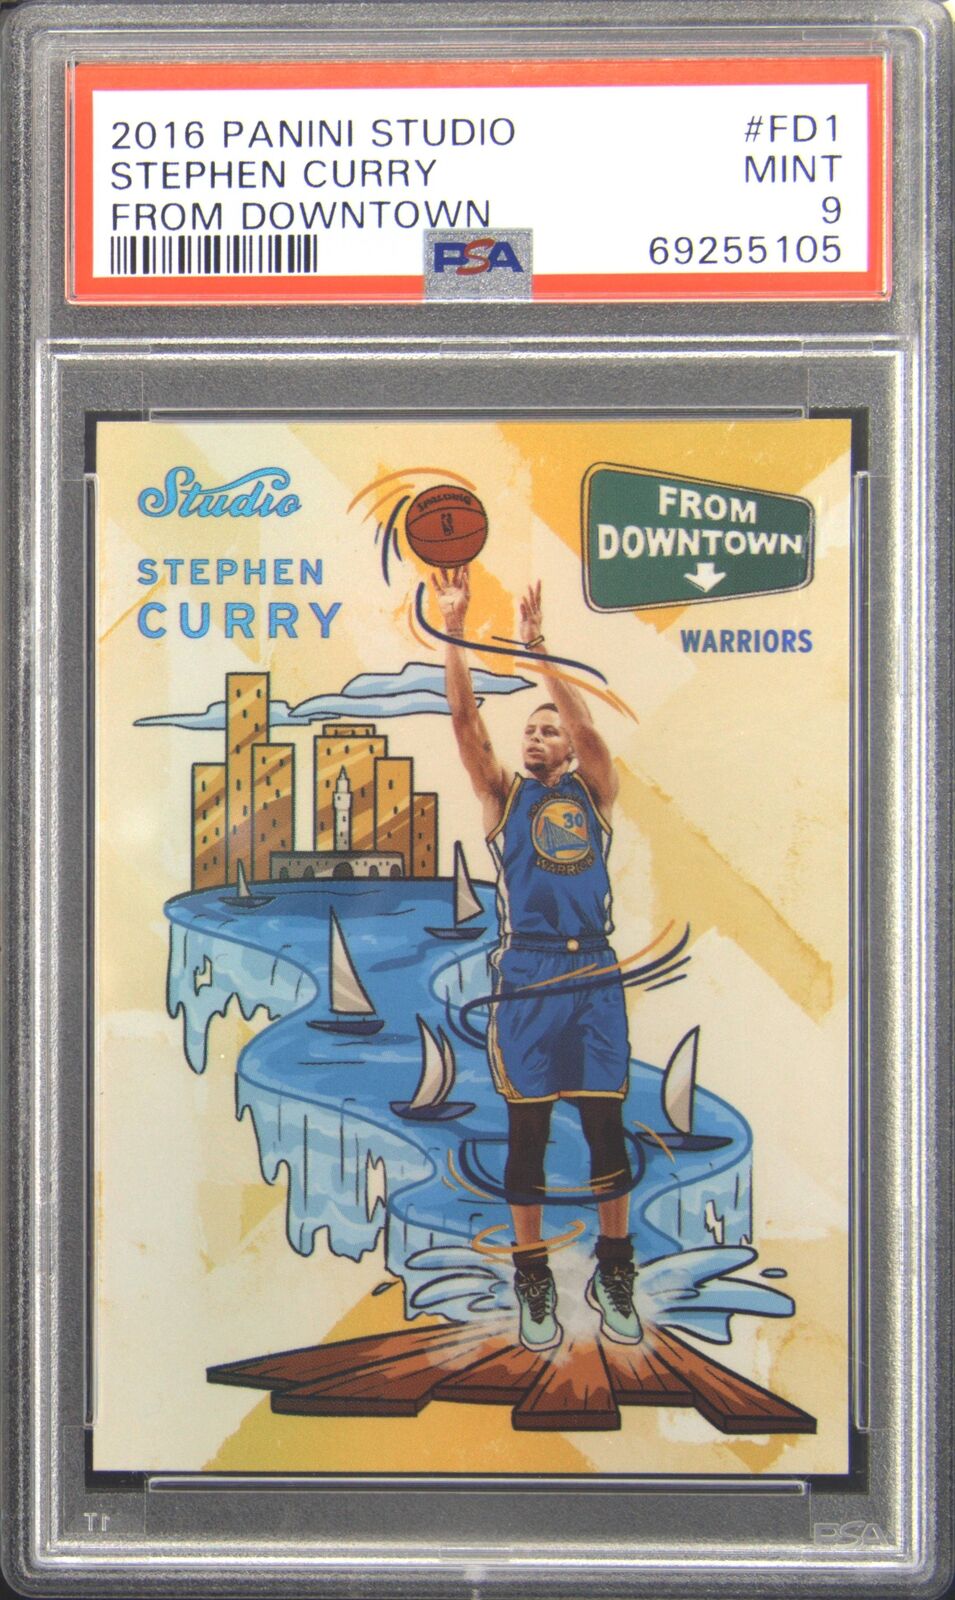 2016 Panini Studio From Downtown #FD1 Stephen Curry PSA 9